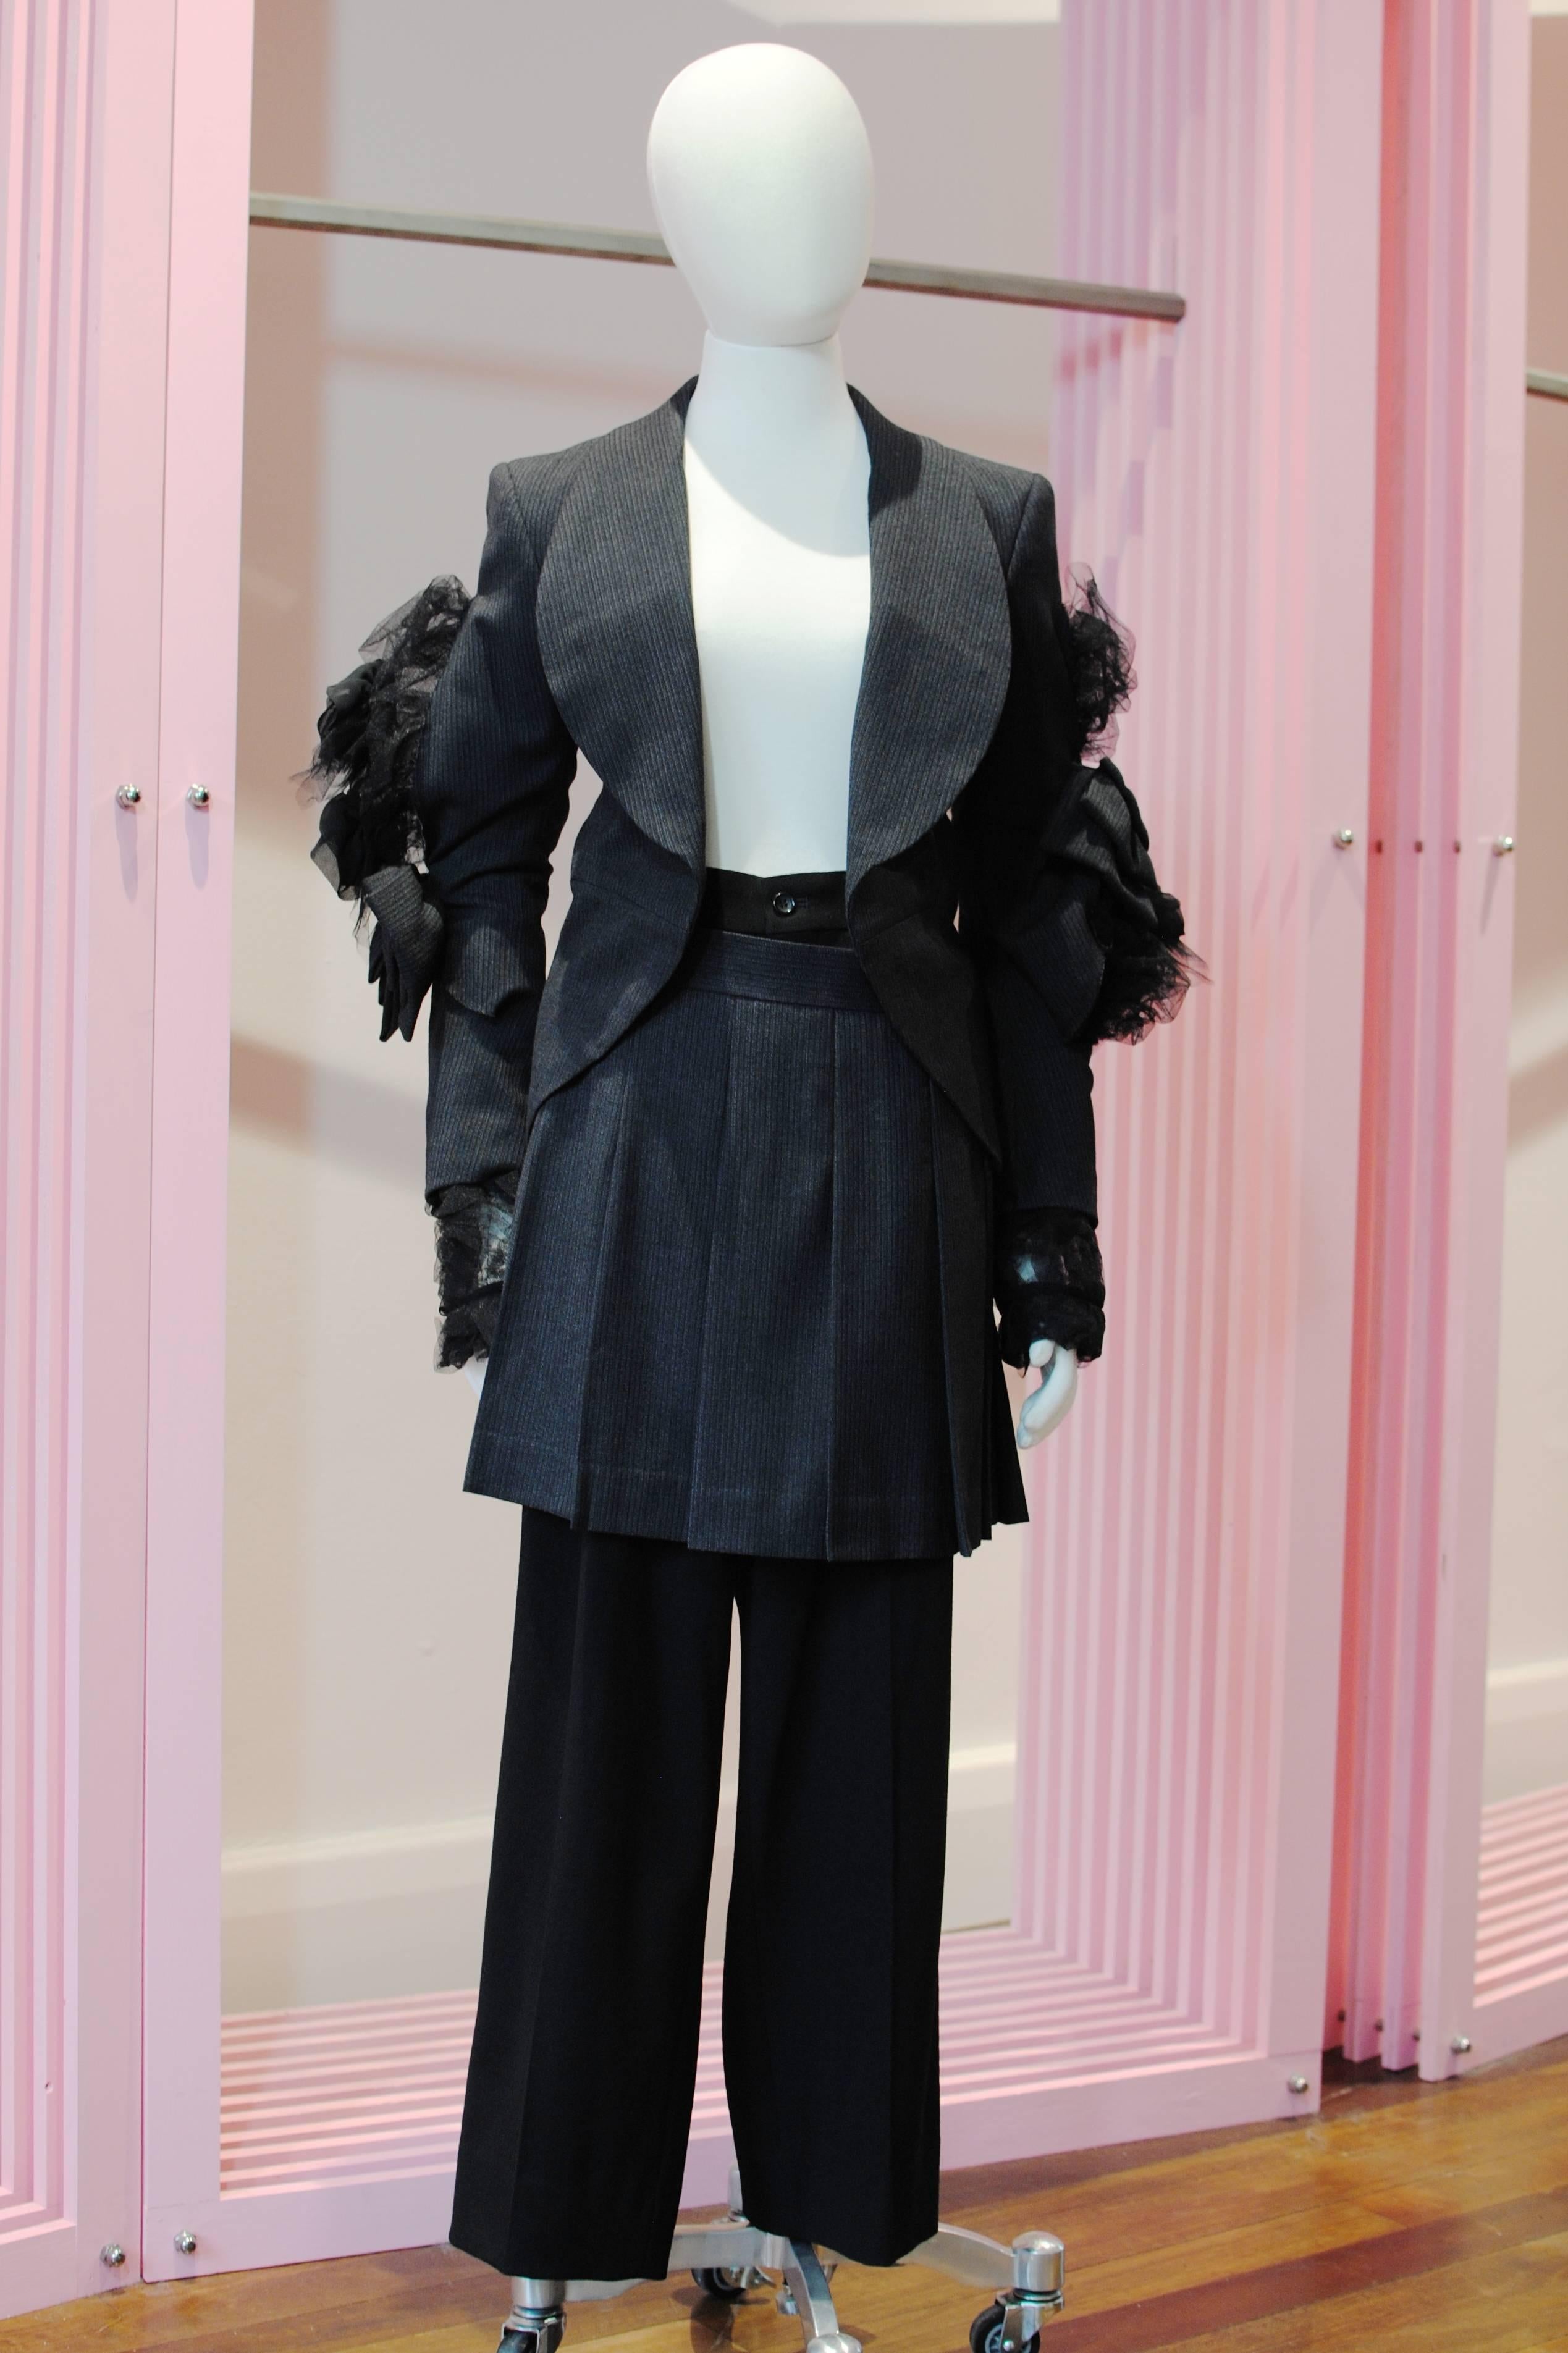 COMME des GARÇONS grey and black double layered suit from the 2004 Autumn/Winter collection. The jacket features a ruffled tulle under layer with attached rosettes which spills out through a dissection at the elbow that is patched up with a bow.